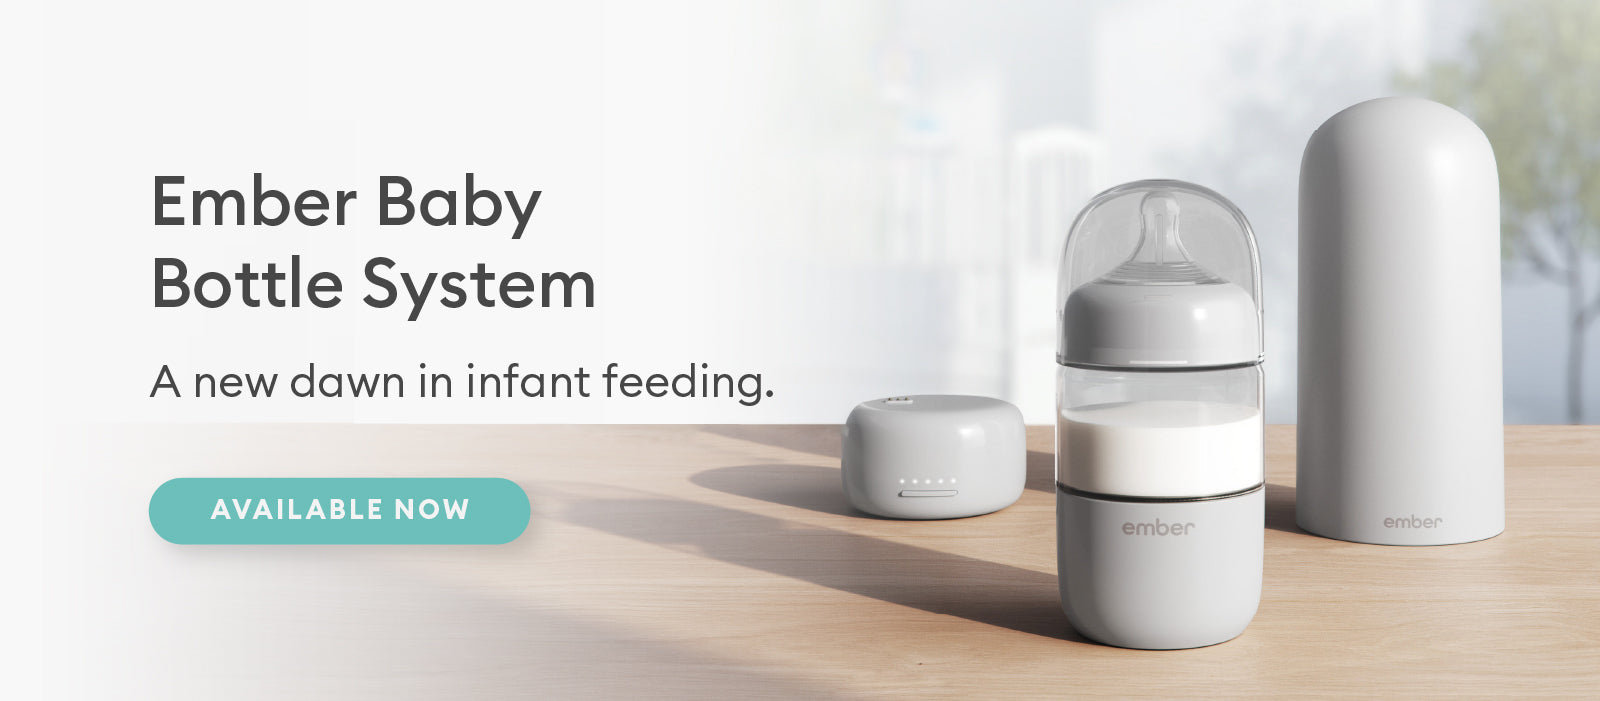 Ember Baby Bottle System sits in a nursery. A new dawn in infant feeding. Available now.